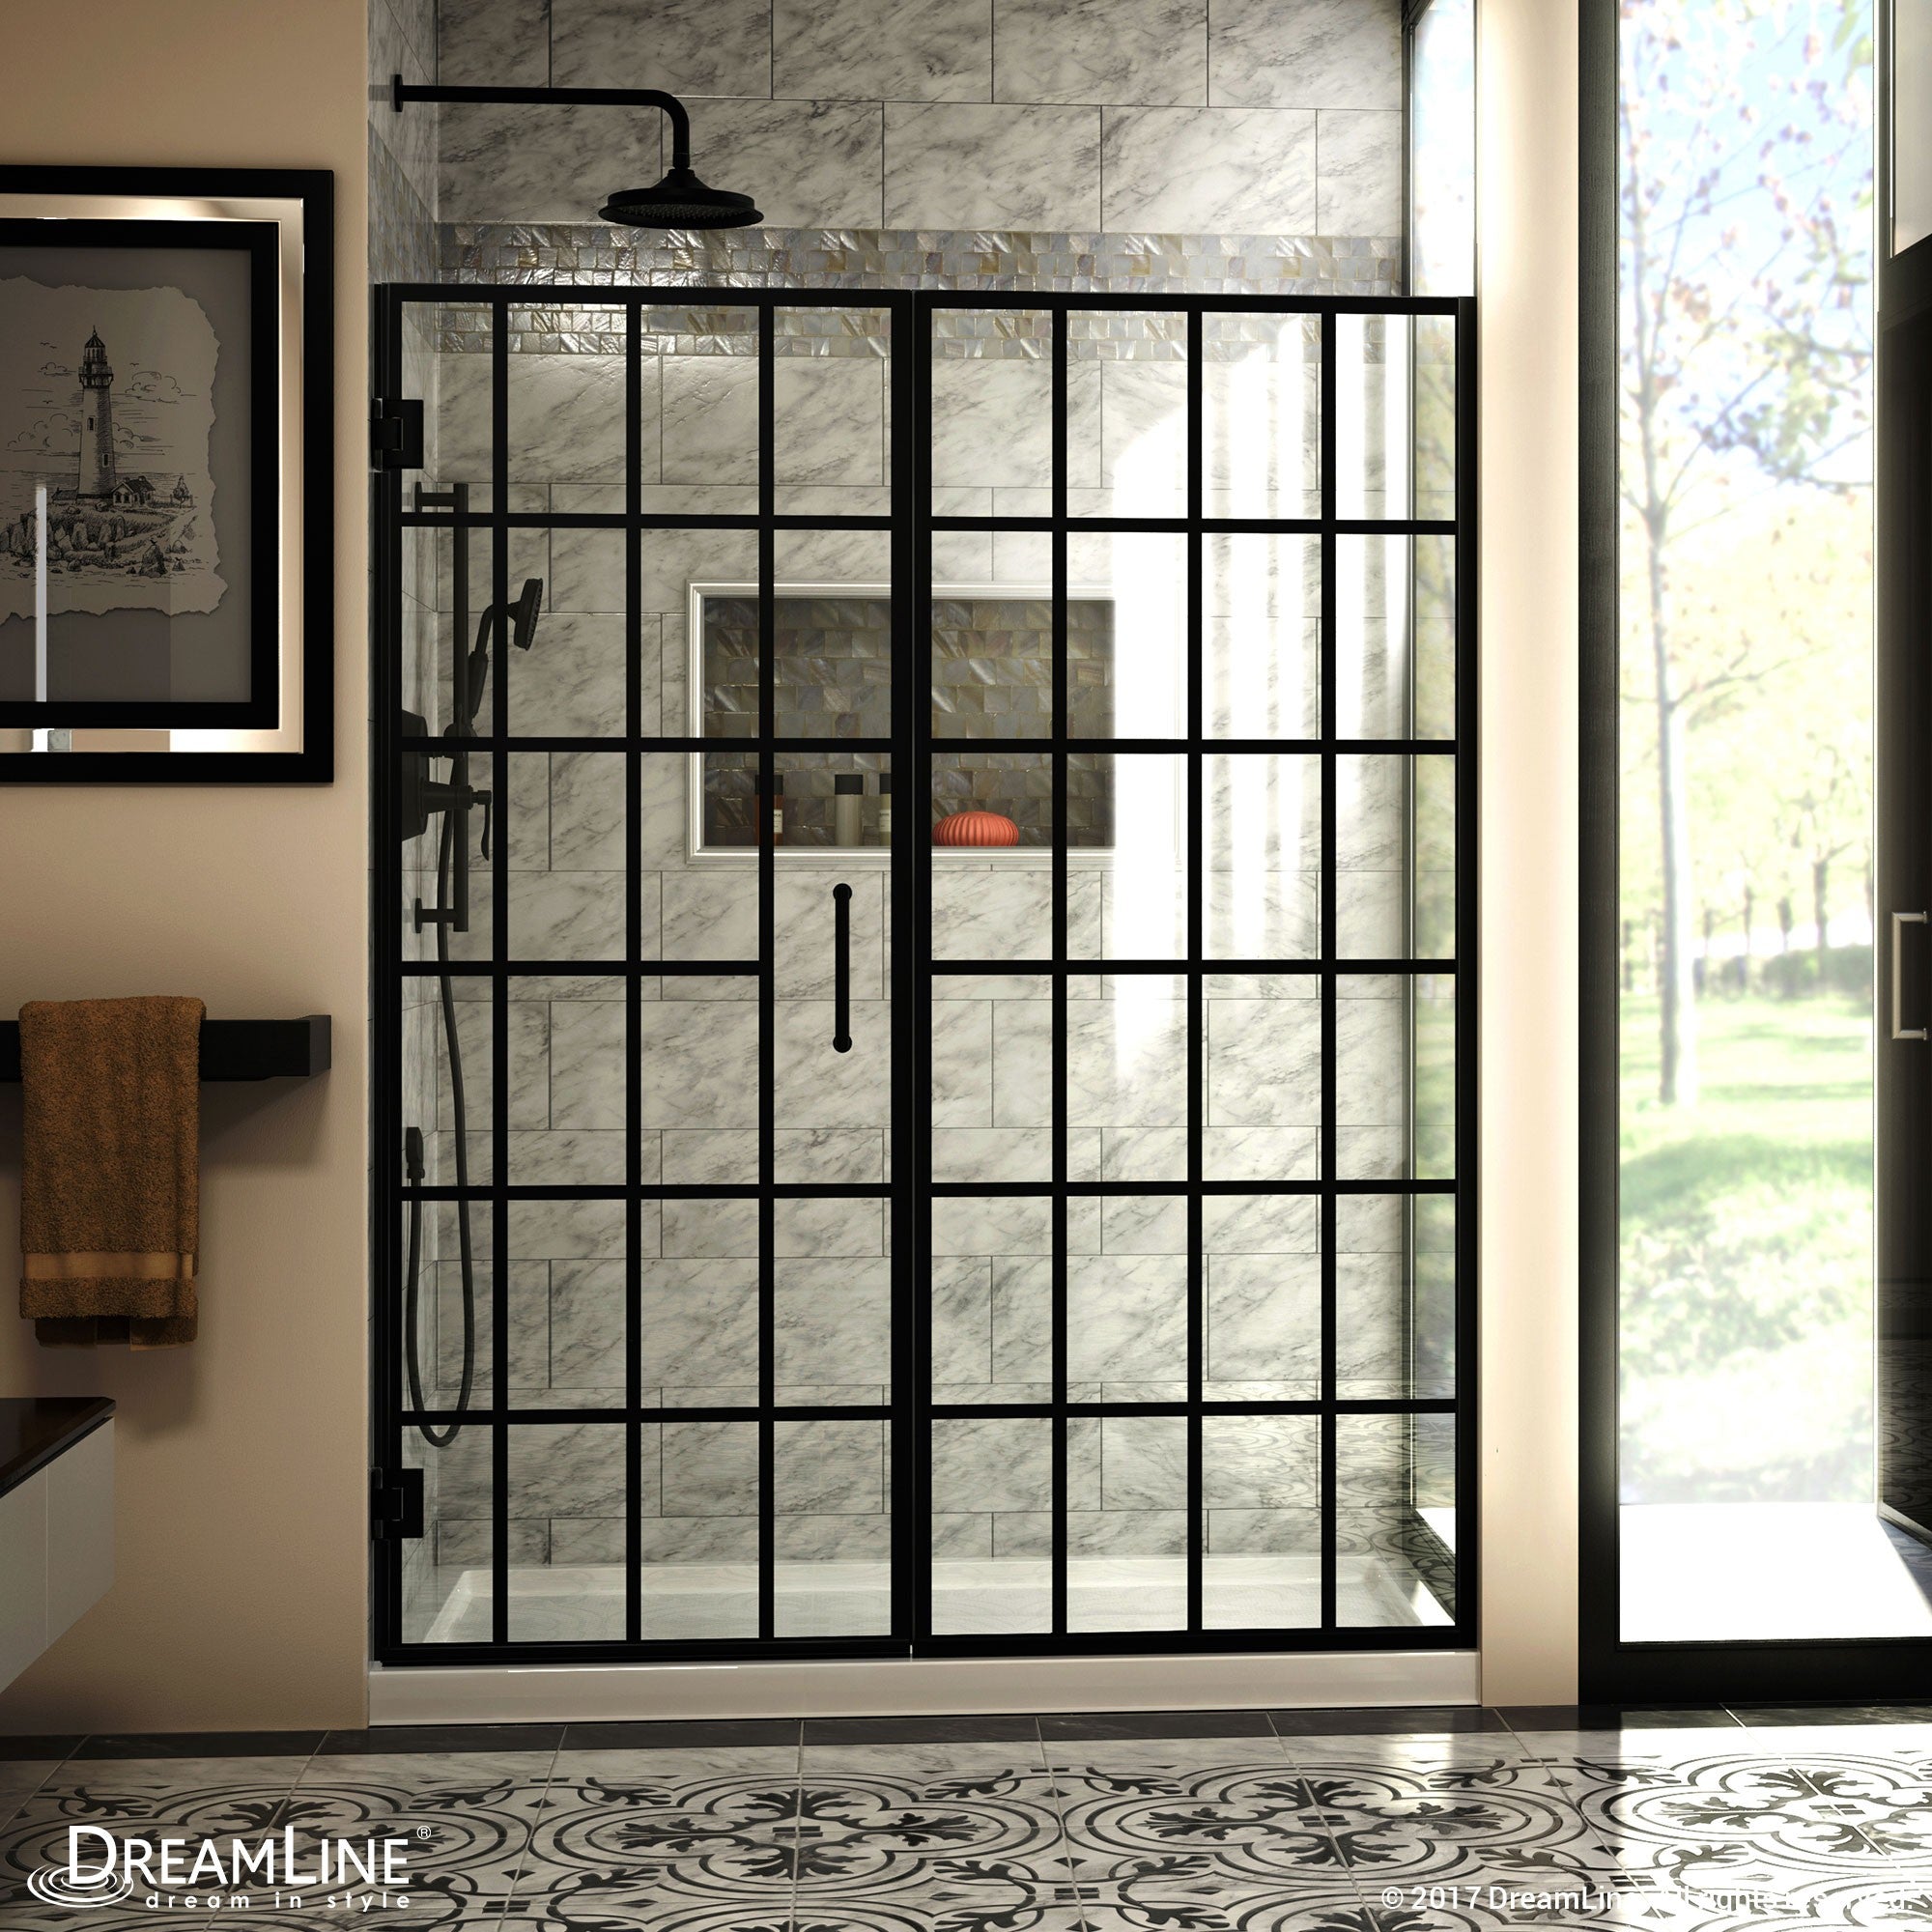 DreamLine   Toulon 72" High x 58-1/2" Wide Hinged Frameless Shower Door with Pattern Glass pc263